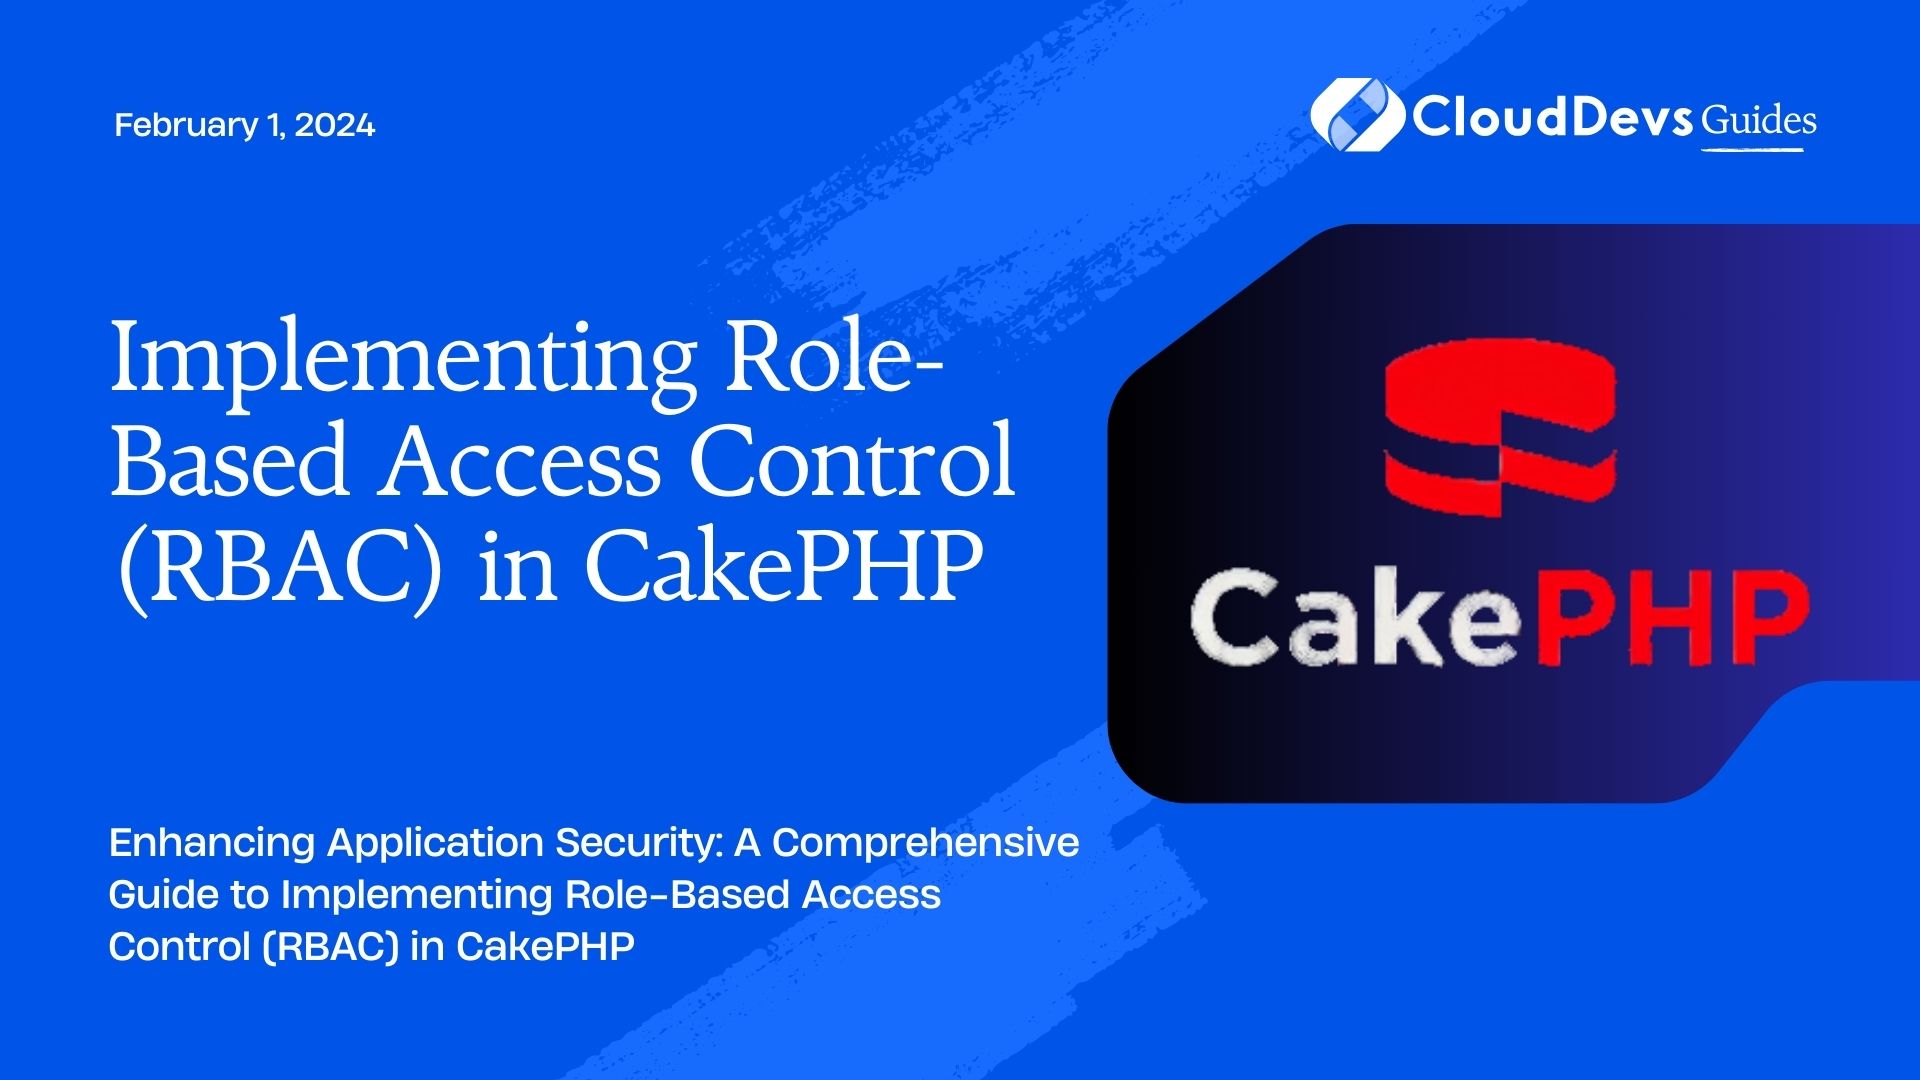 Implementing Role-Based Access Control (RBAC) in CakePHP